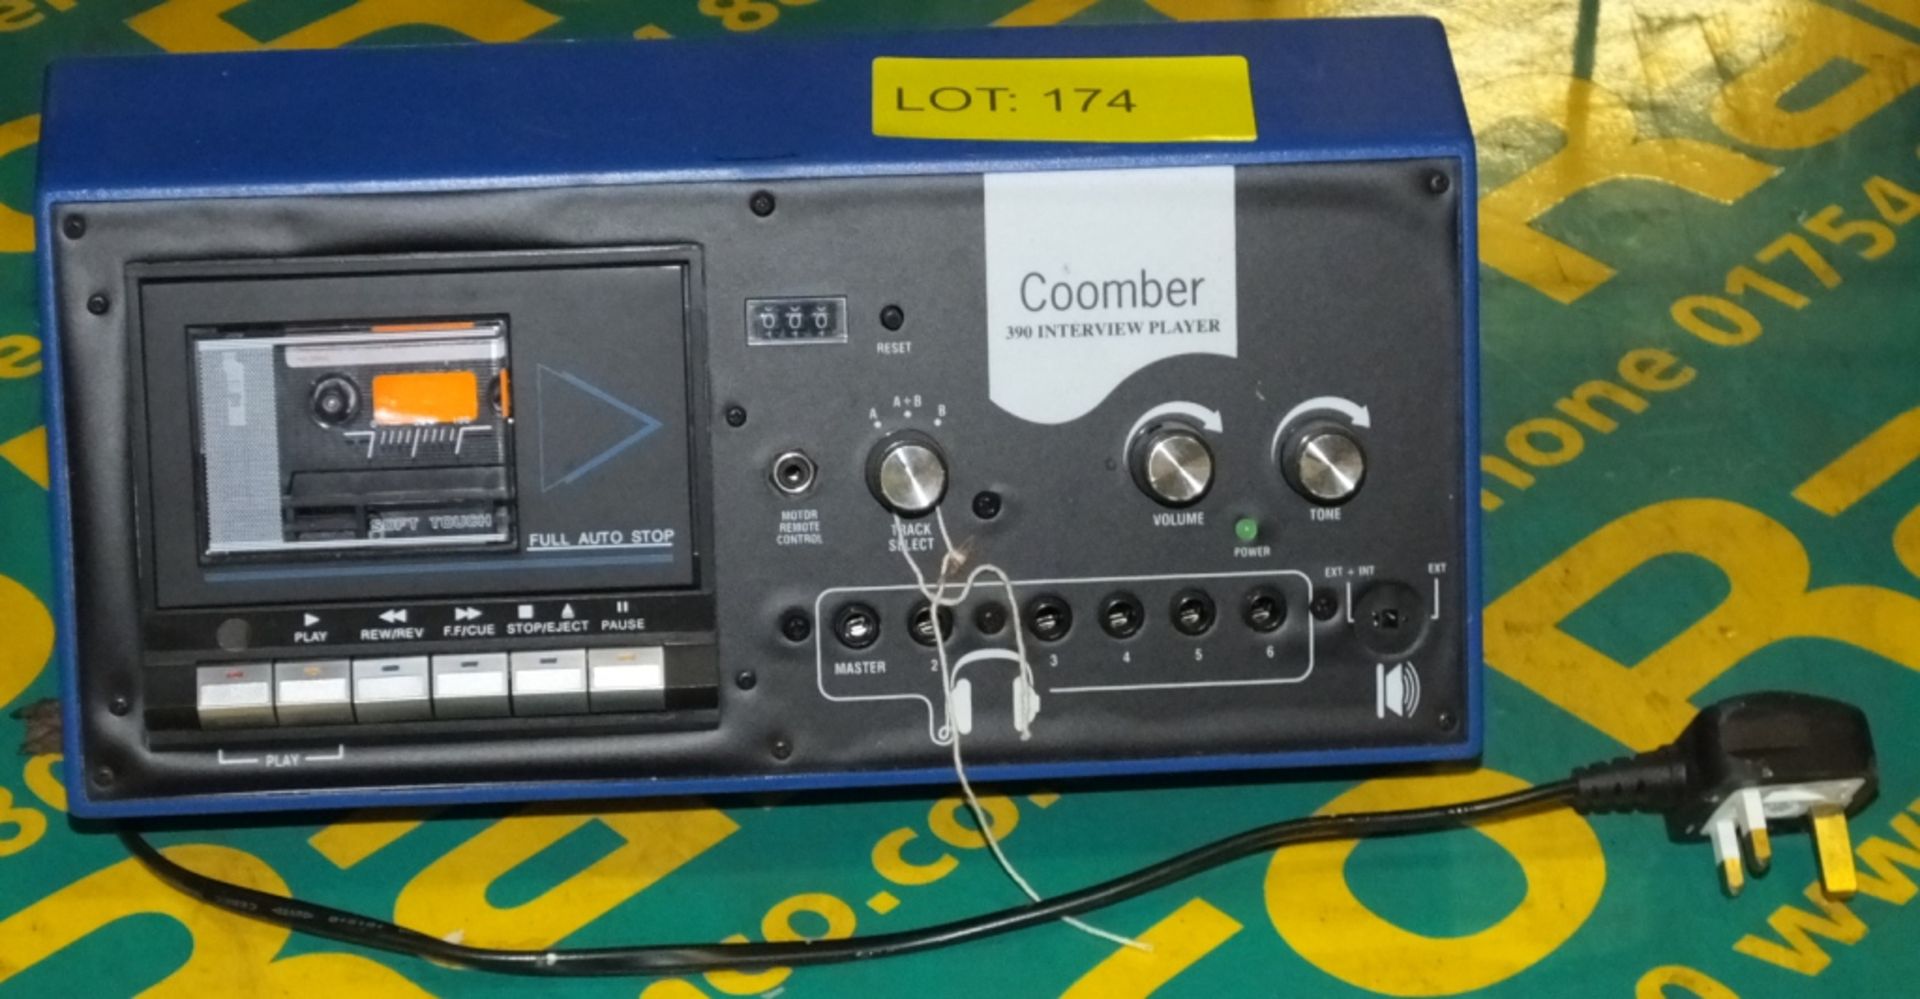 Coomber 390 Interview tape recorder / player